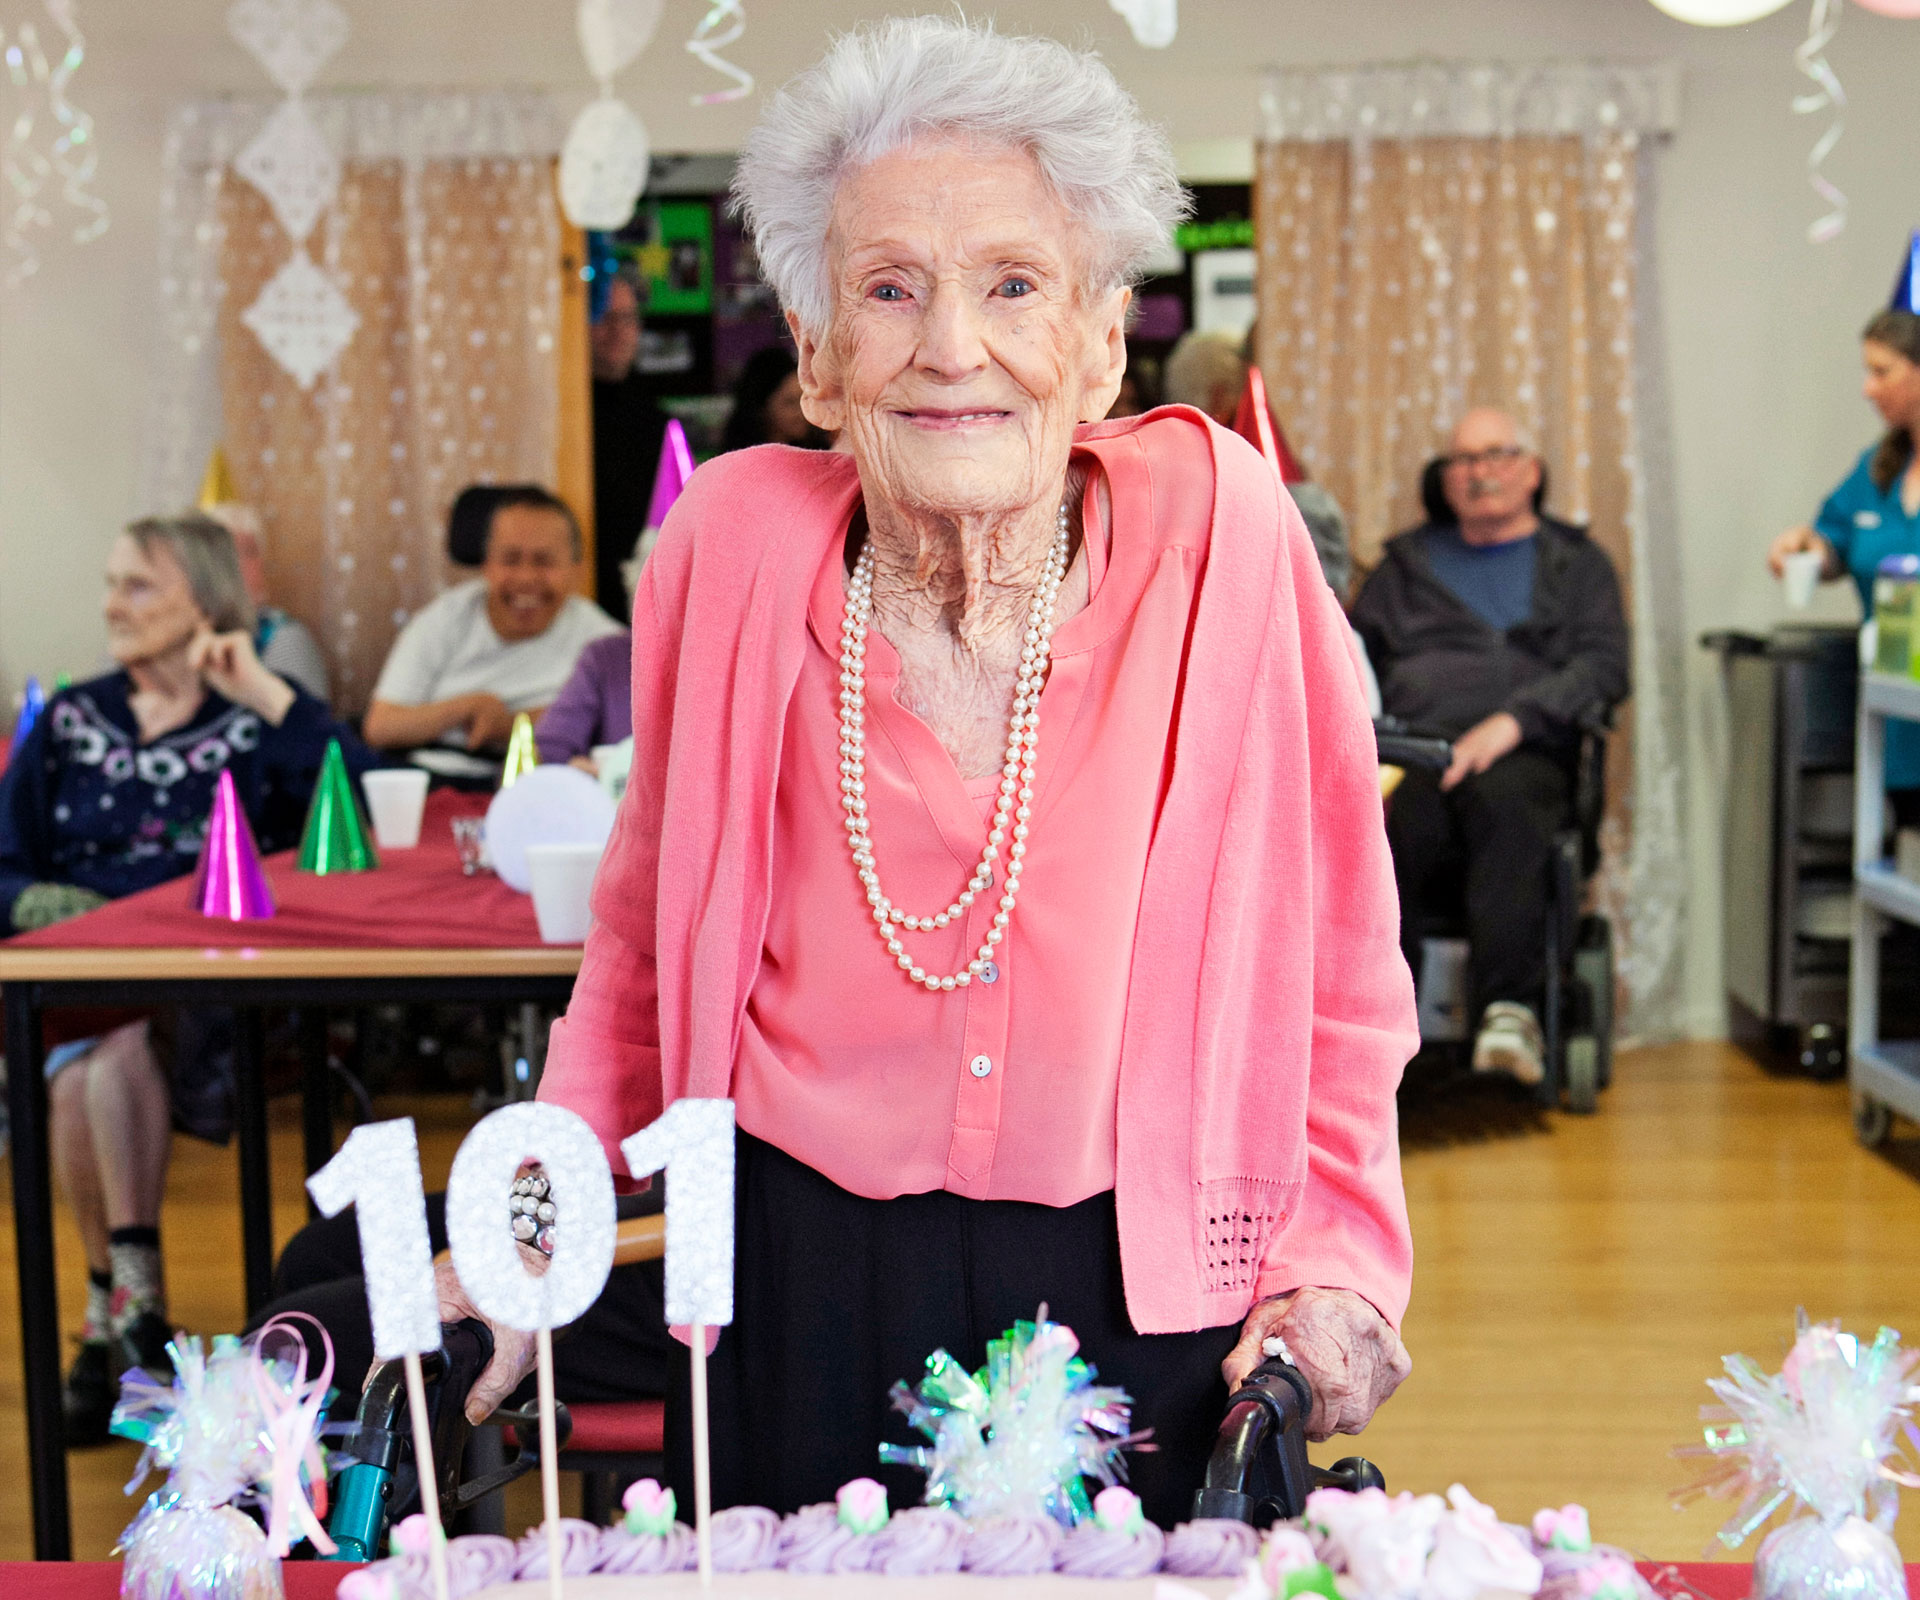 The secret to a long life, according to this 101-year-old